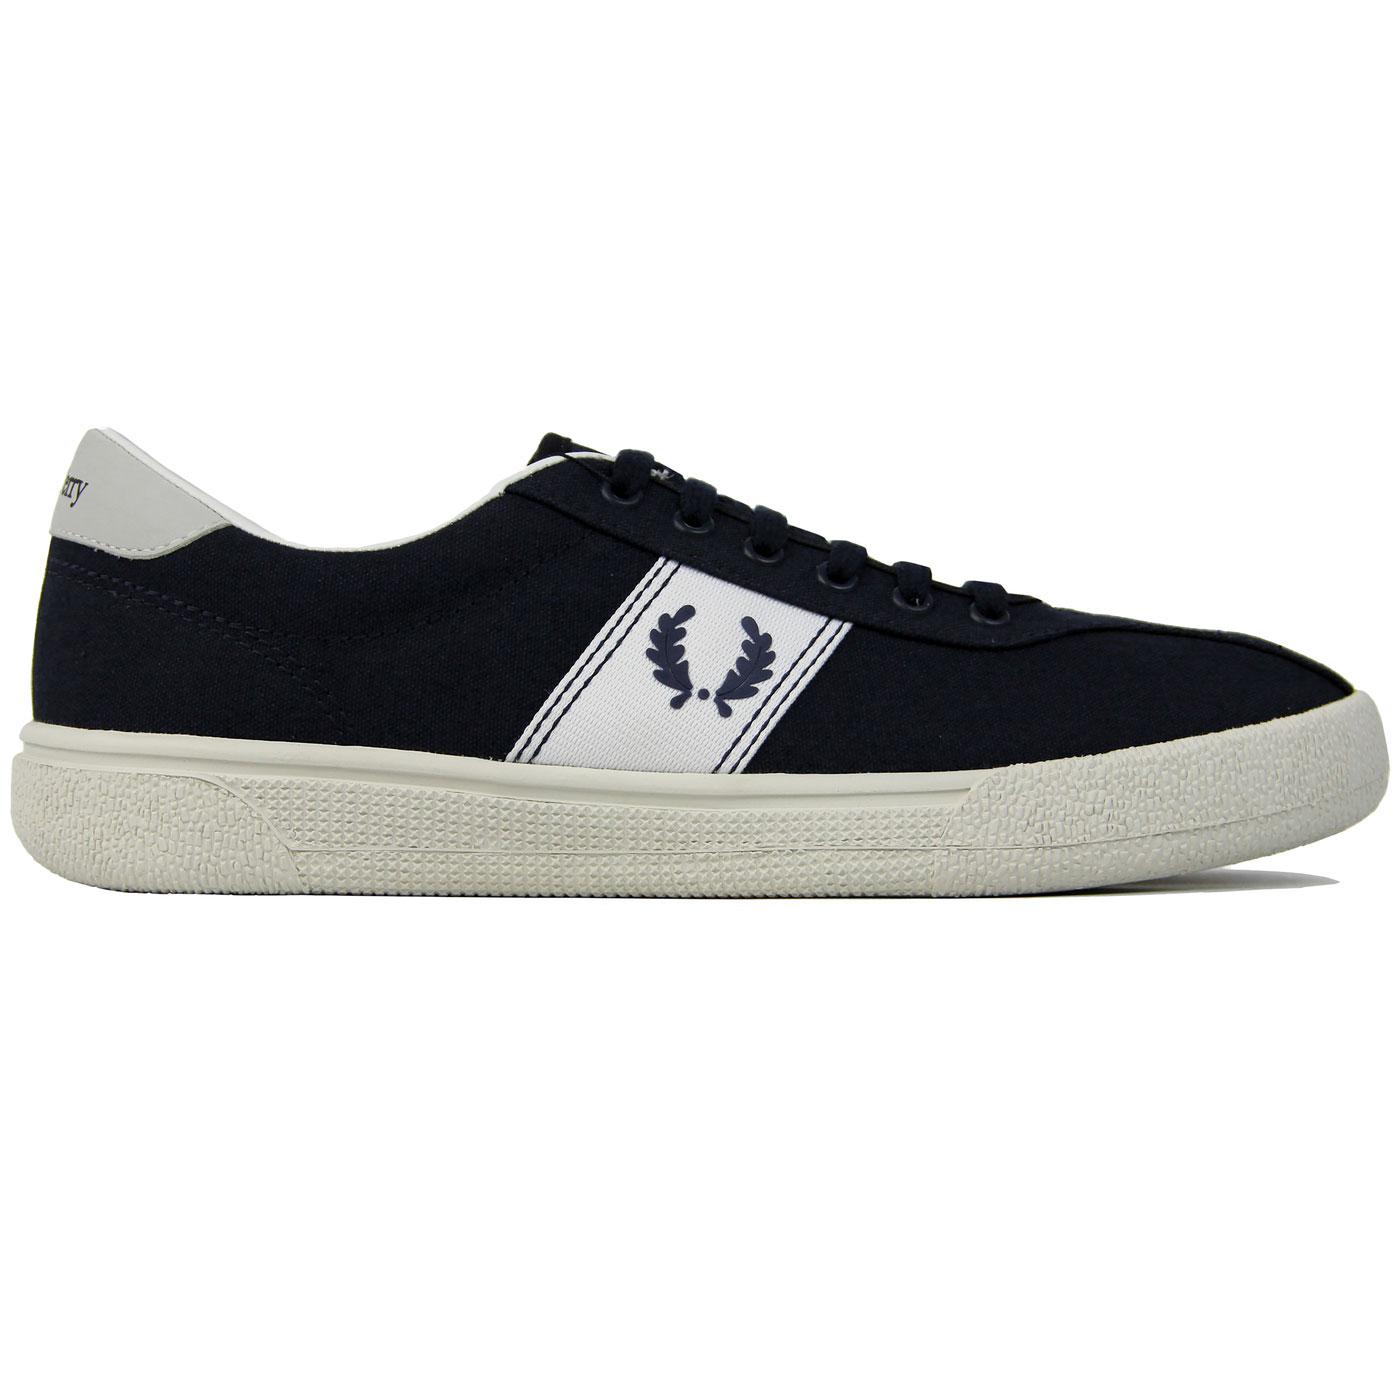 FRED PERRY Mens Retro 70s Tennis Shoes in Navy